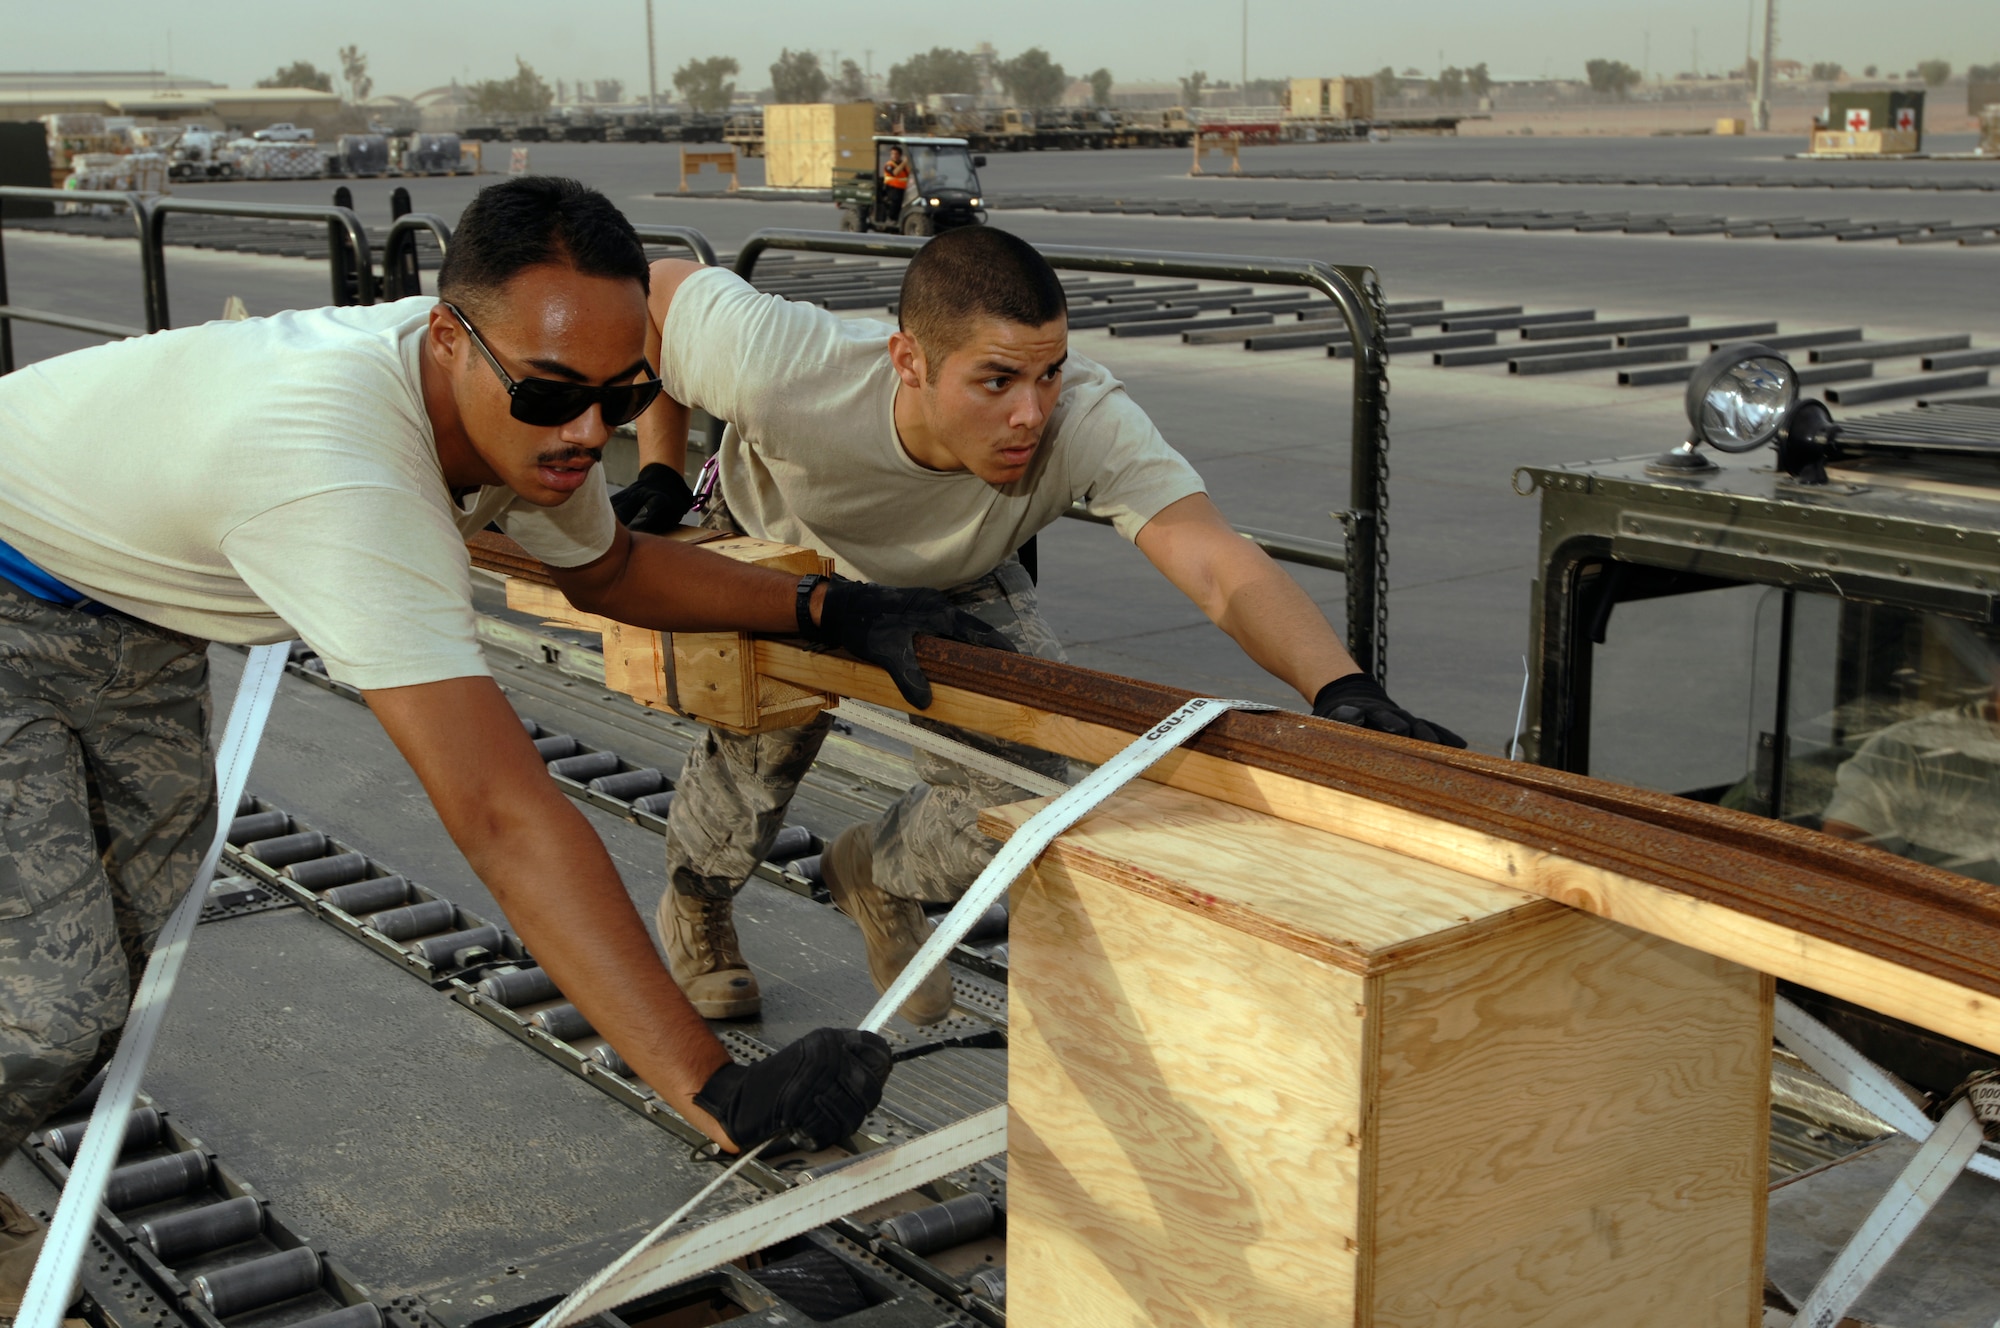 JOINT BASE BALAD, Iraq -- Airmen 1st Class Shane Costa (left) and Dennis Gaxiola, push a palette train off a 60k-loader driven by Senior Airman Derek Dumlao onto a high line dock here Aug. 24. All three Airmen completed a new Air Force Reserve seasoning training program prior to deploying here. The program allows Airmen to voluntarily remain on active duty for upgrade training, finishing it in three months instead of 14 to 16 months. Dumlao, Gaxiola and Costa, aerial porters with the 332nd Expeditionary Logistics Readiness Squadron here, are deployed from the 624th Regional Support Group at Hickam Air Force Base, Hawaii. All three Airmen graduated from Leilehua High School in Wahiawa, Hawaii, in 2004. (U.S. Air Force photo/Airman 1st Class Jason Epley)